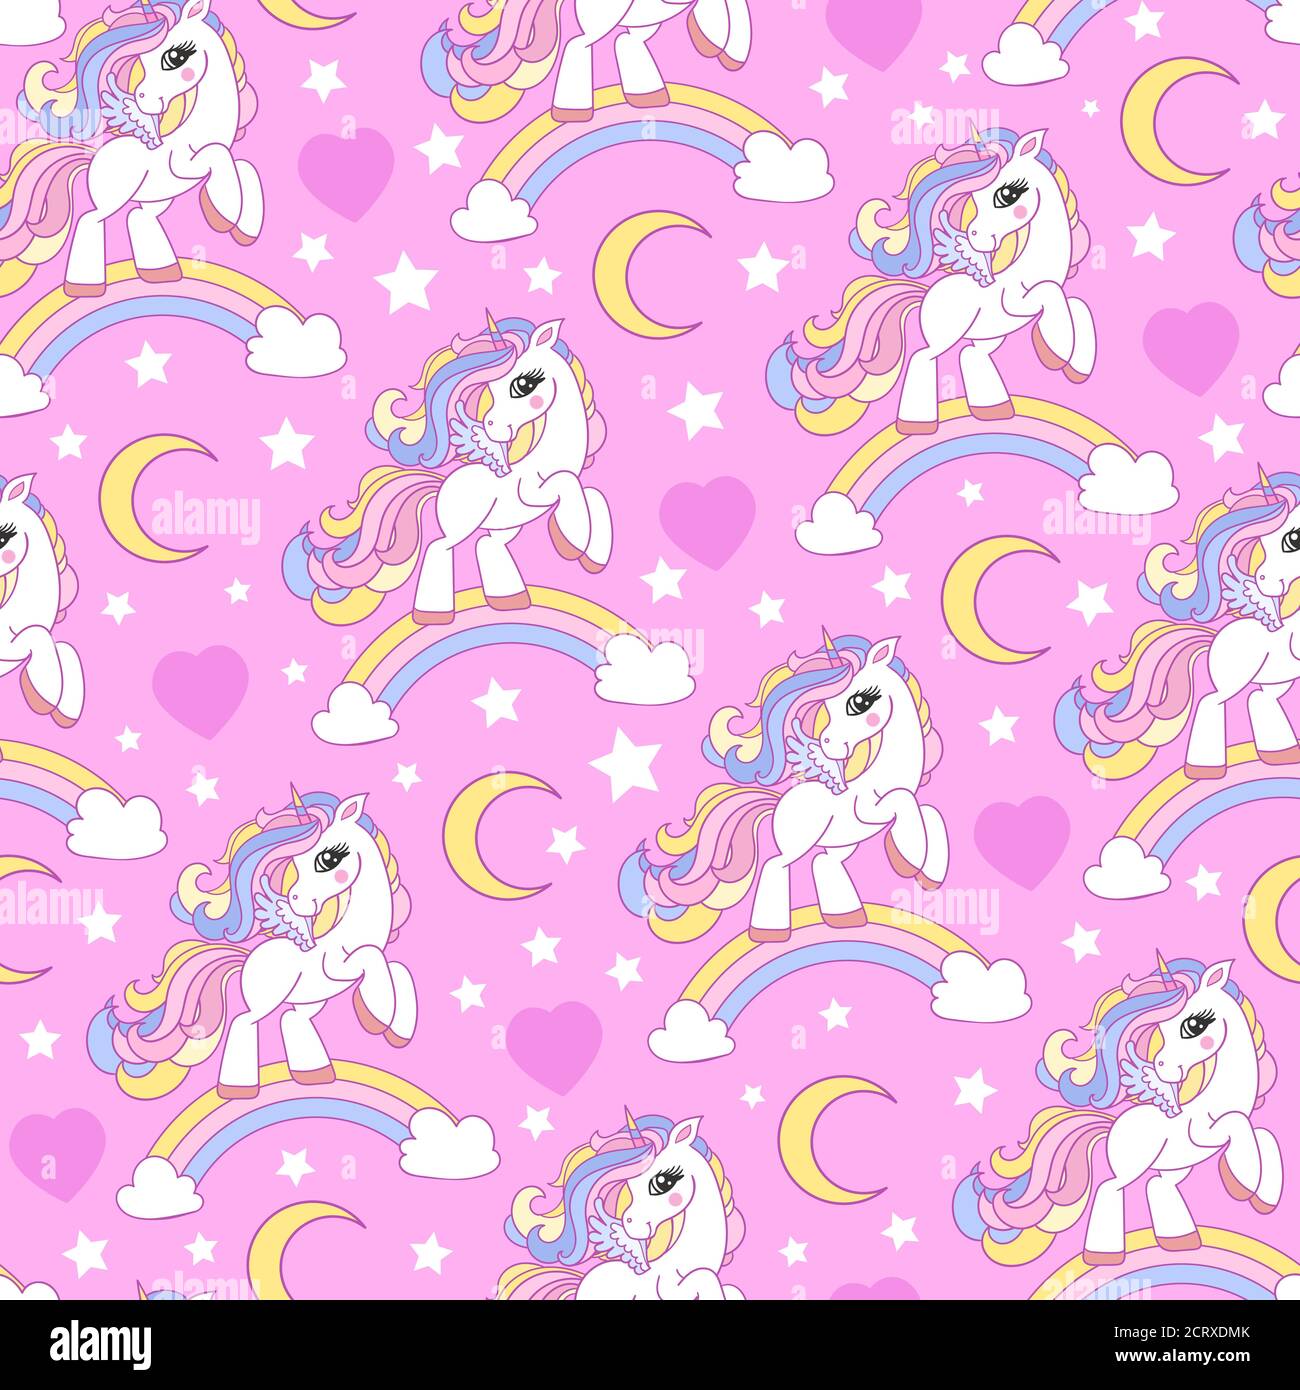 Unicorn background Cut Out Stock Images & Pictures - Alamy